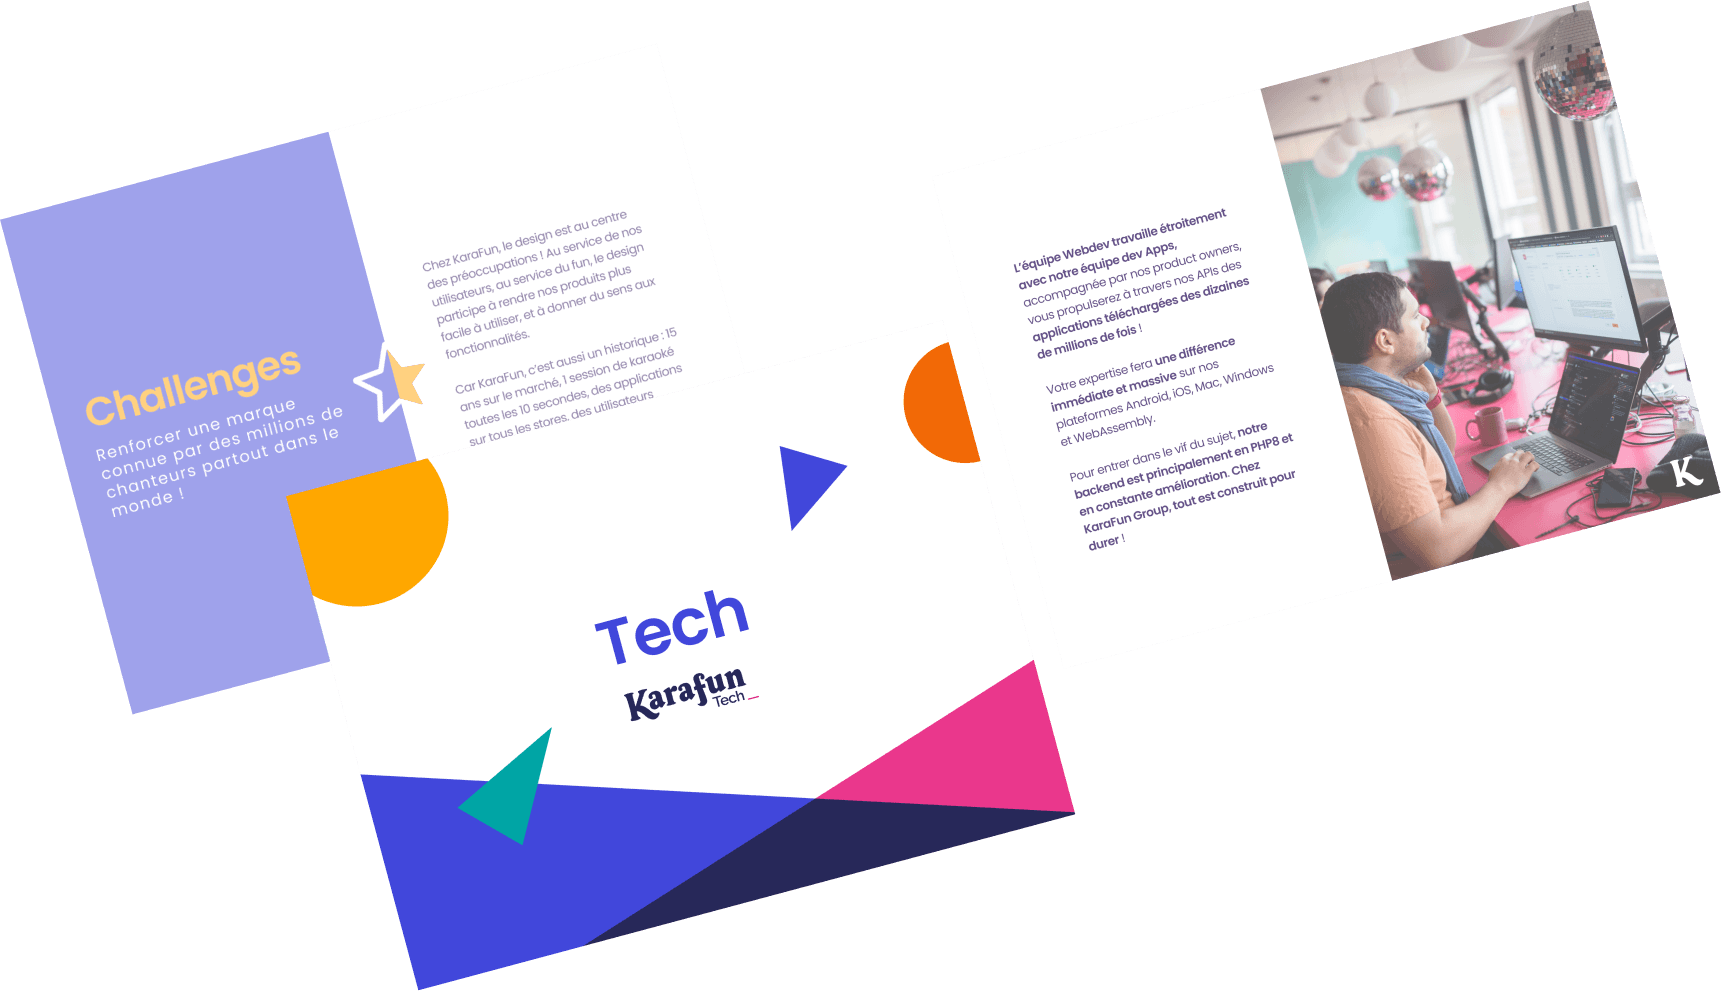 Download our Tech Manifesto